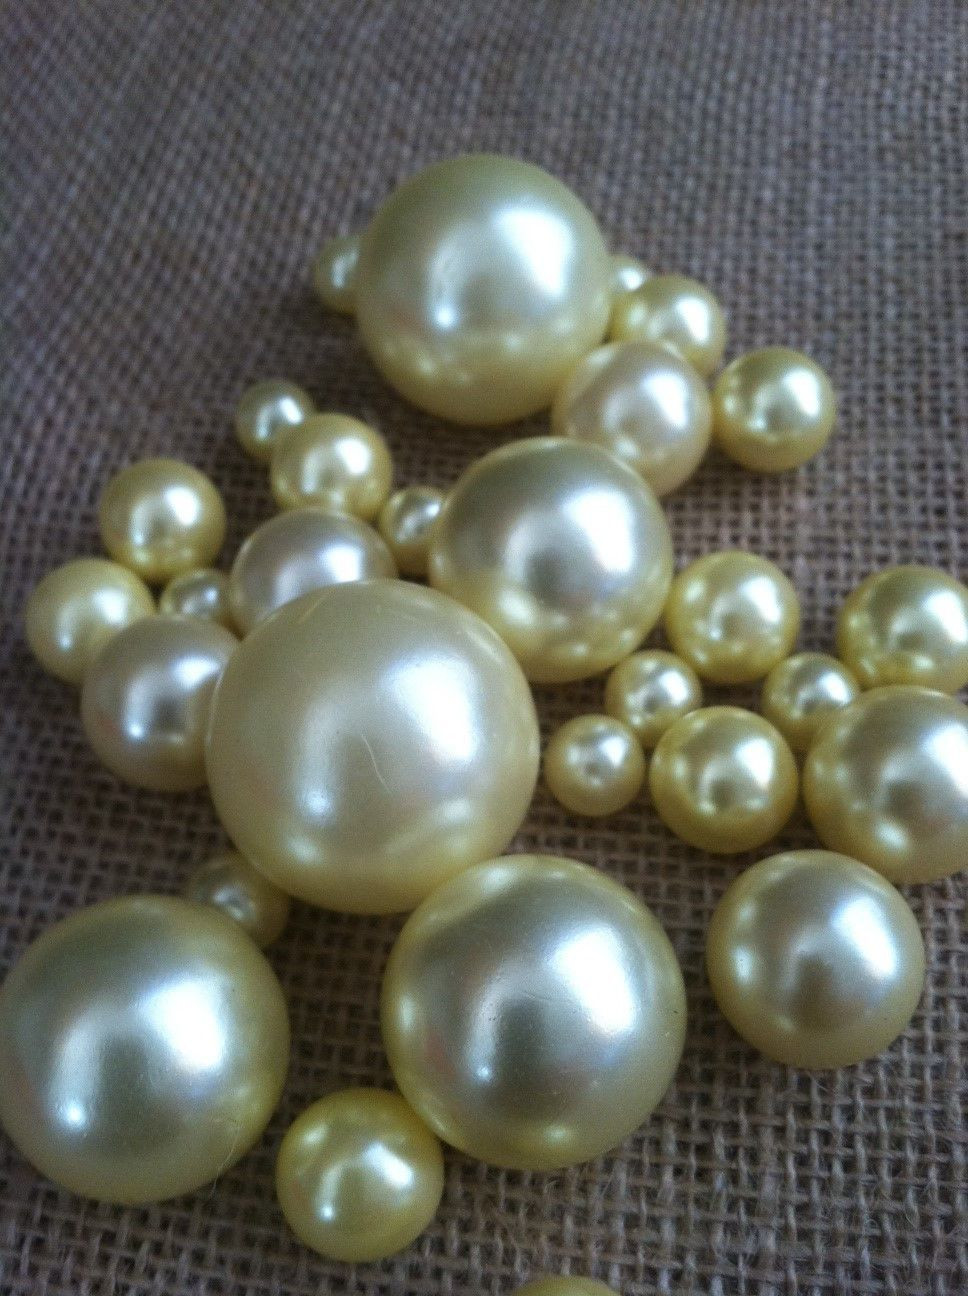 24 Popular Vase Filler Balls 2024 free download vase filler balls of light yellow pearls for floating pearl centerpieces jumbo pearls throughout light yellow pearls for floating pearl centerpieces jumbo pearls vase fillers scatters confet